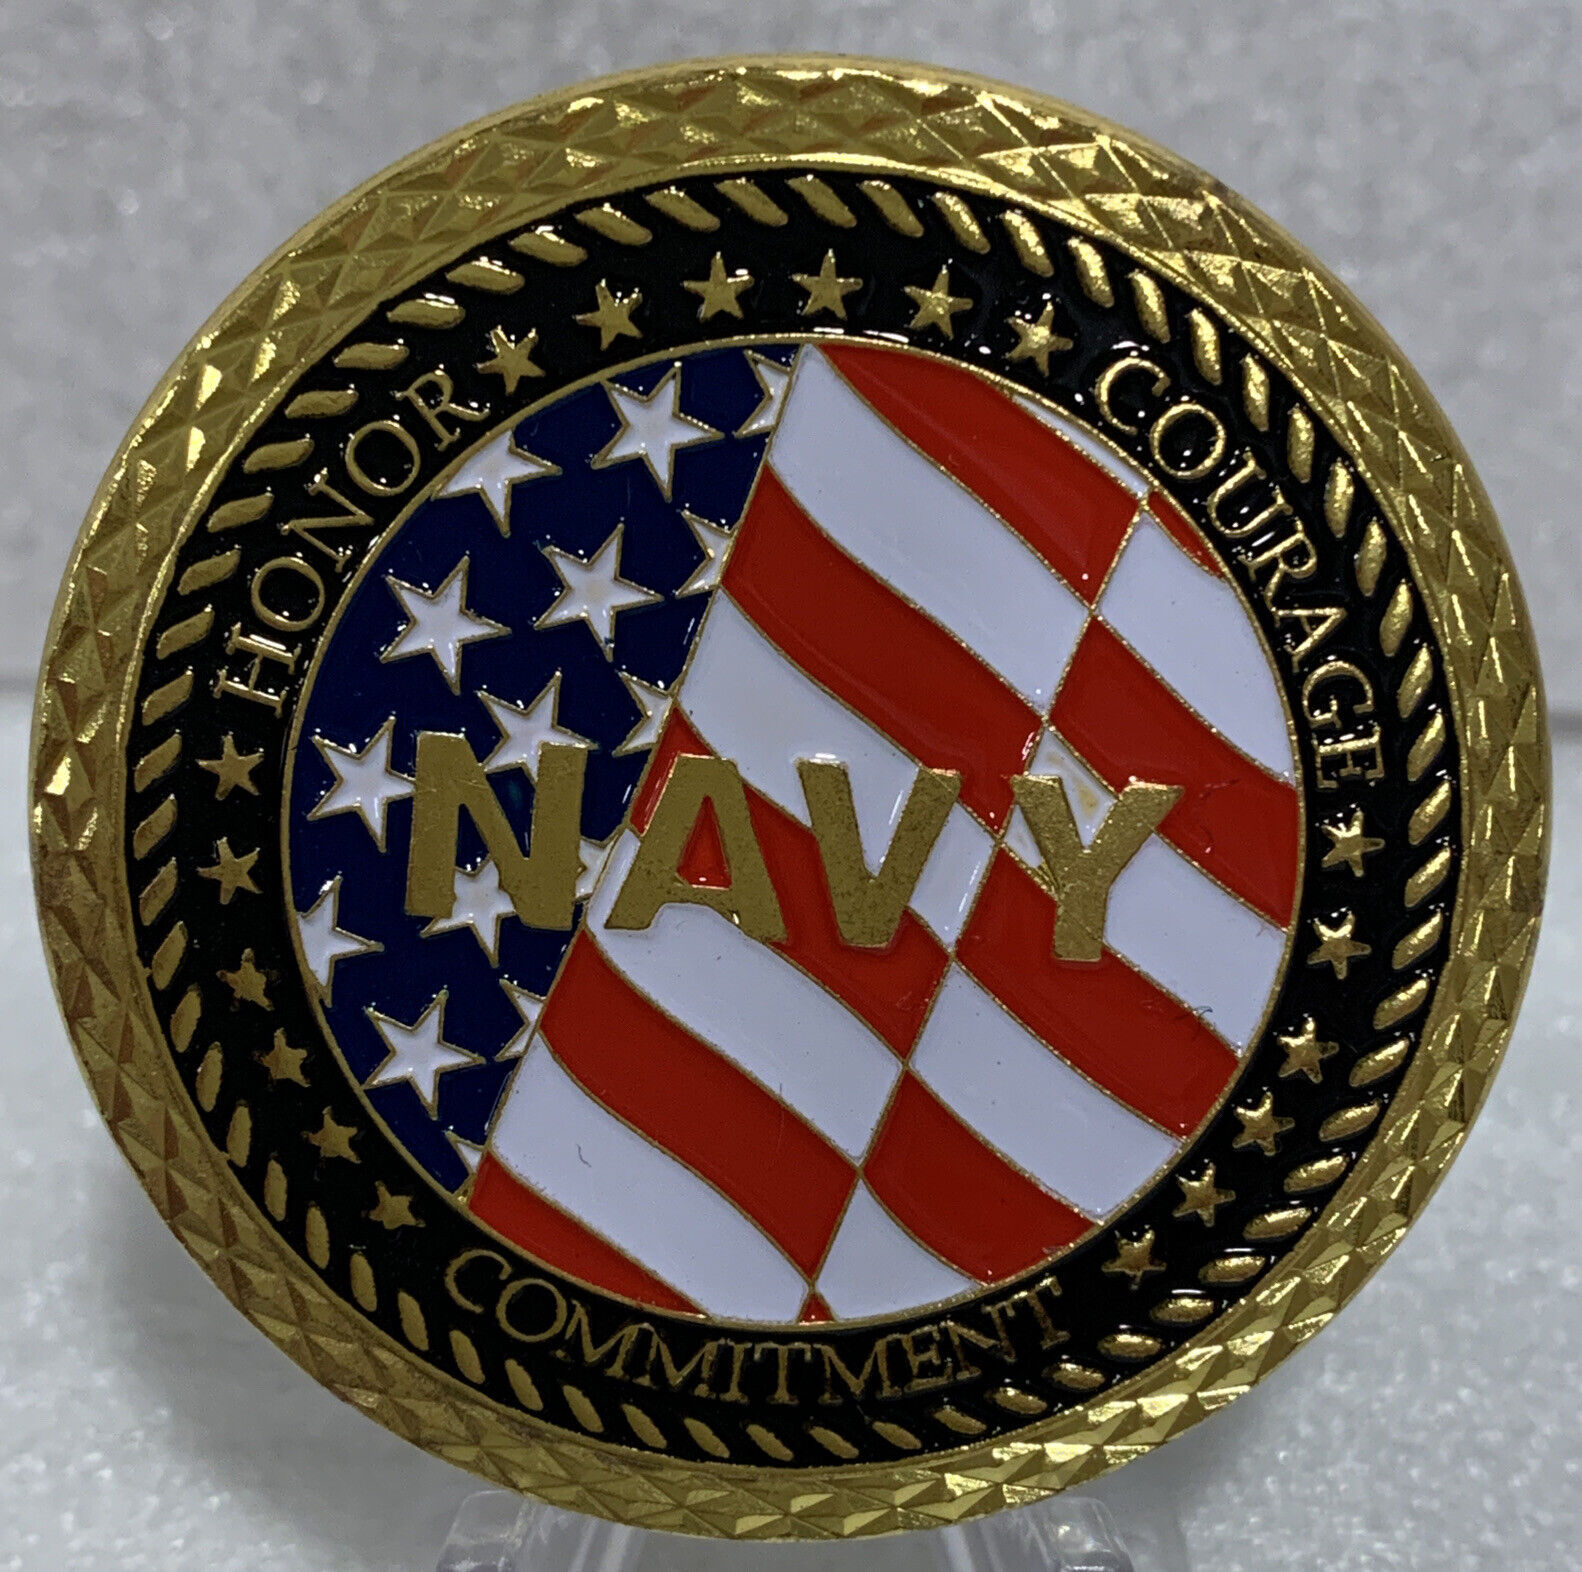 * US Navy Veteran Challenge Coin “Honor Courage And Commitment” Comes In Cap